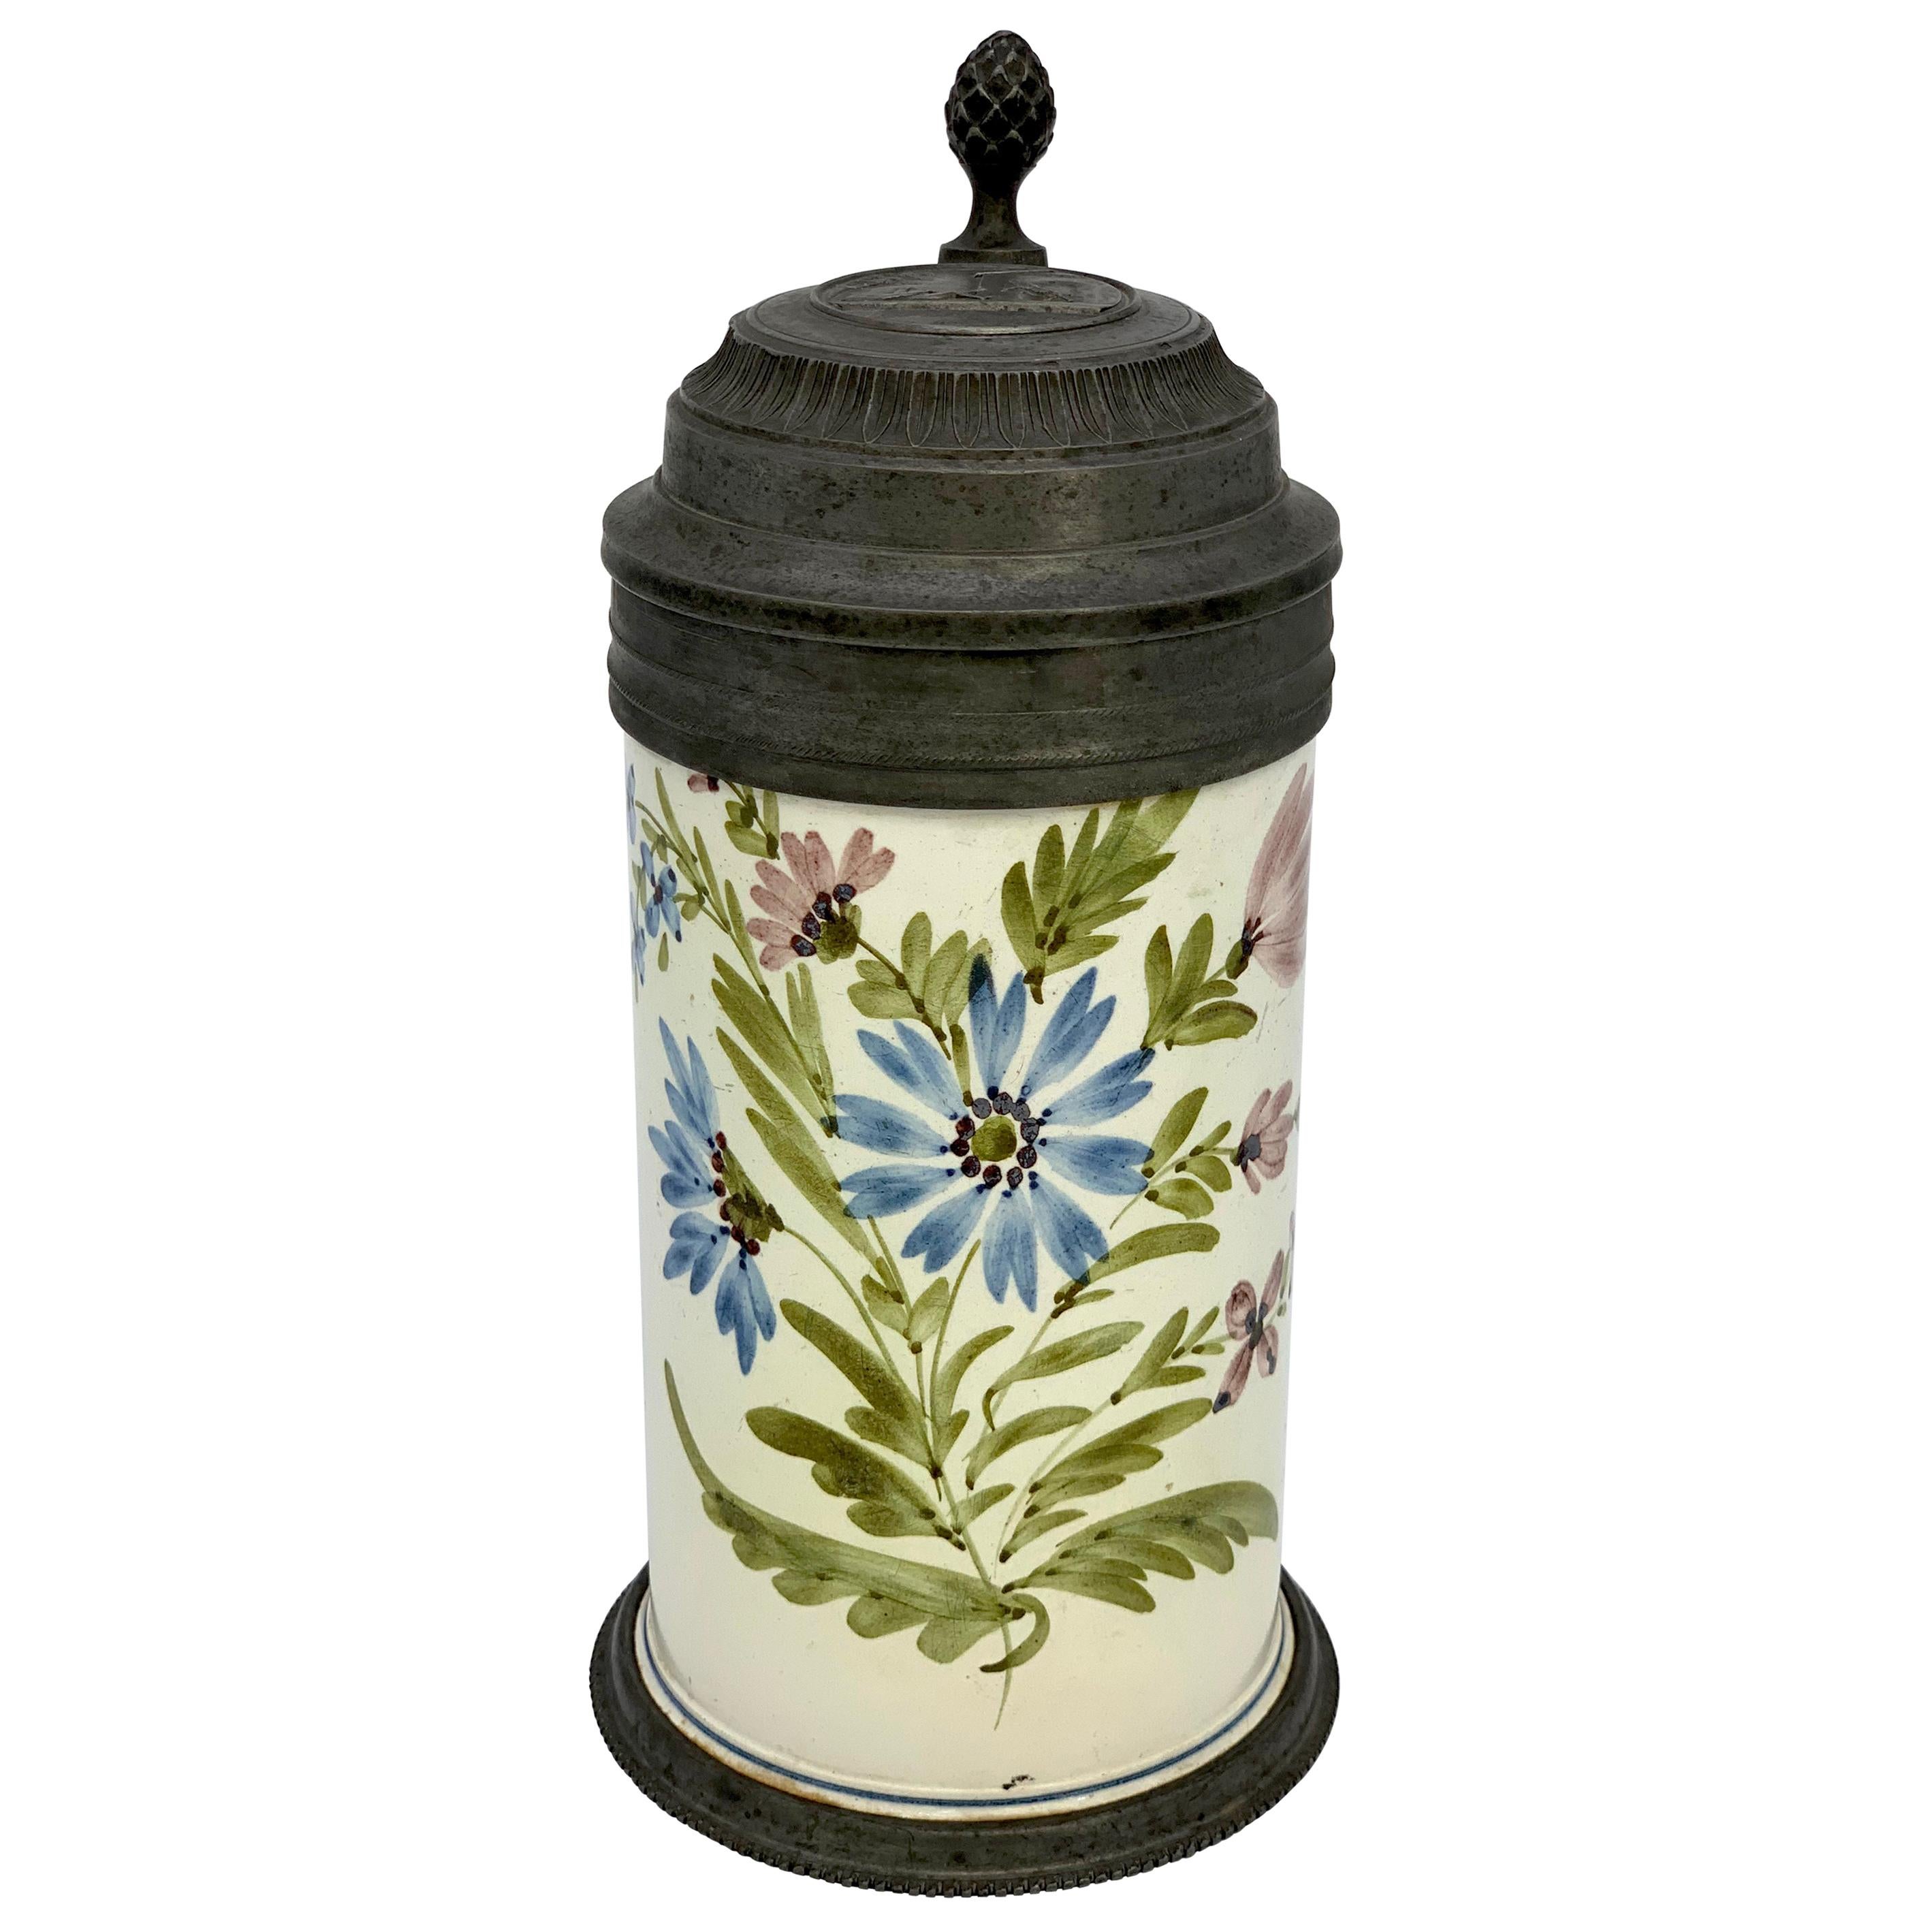 19th Century Hand Painted Ceramic Beer Mug with Tin Lid Engraved with a Bock